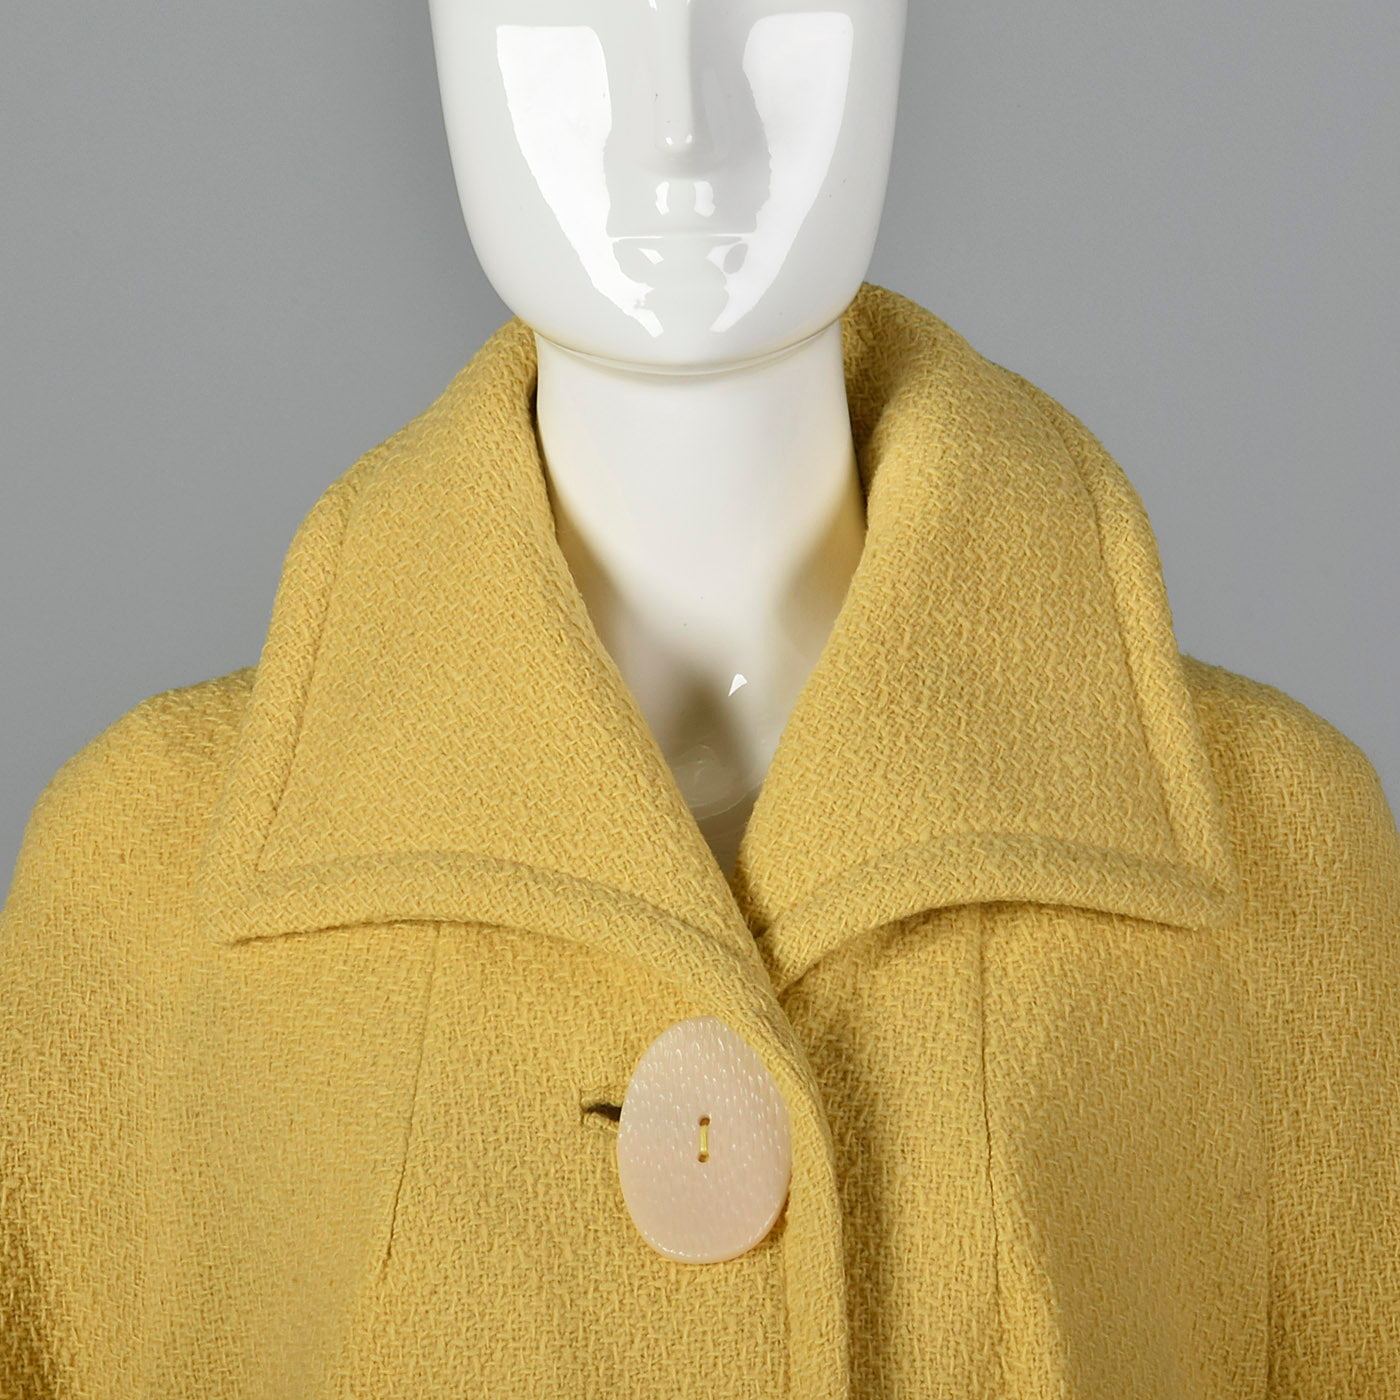 1960s Yellow Jacket with Huge Buttons